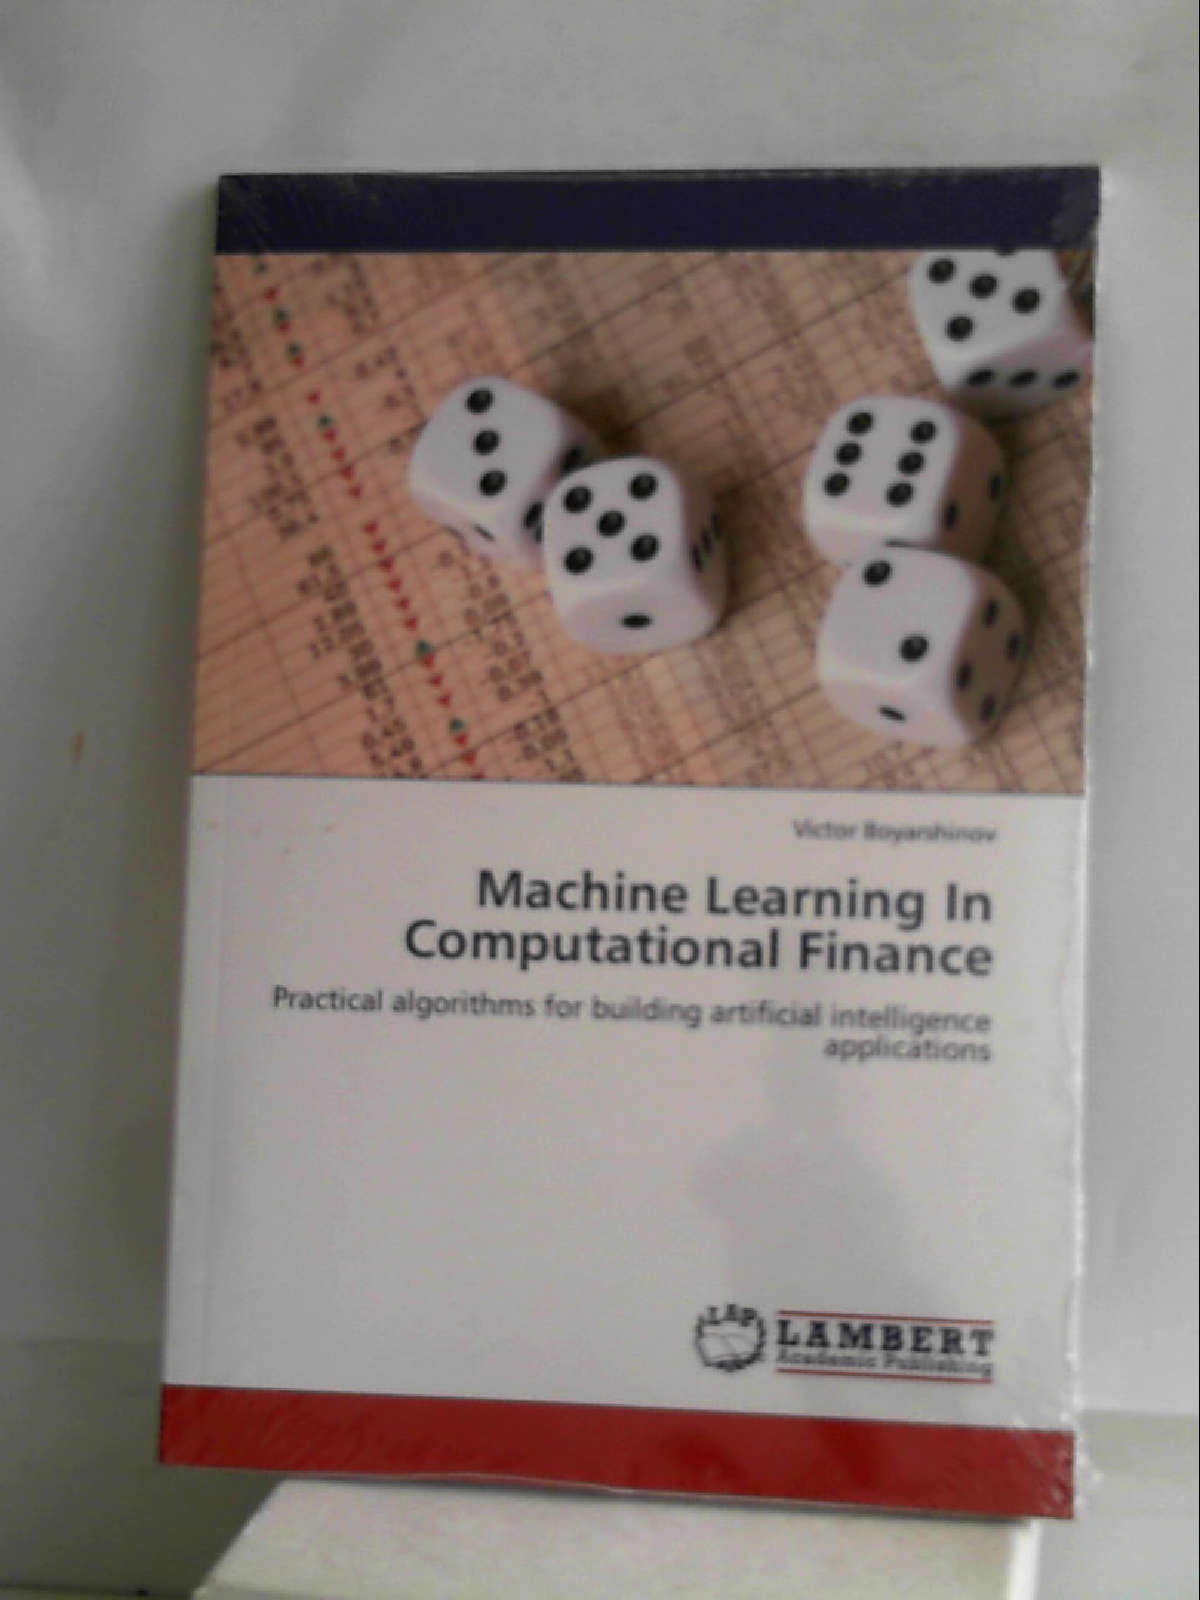 Machine Learning In Computational Finance: Practical algorithms for building artificial intelligence applications - Victor Boyarshinov